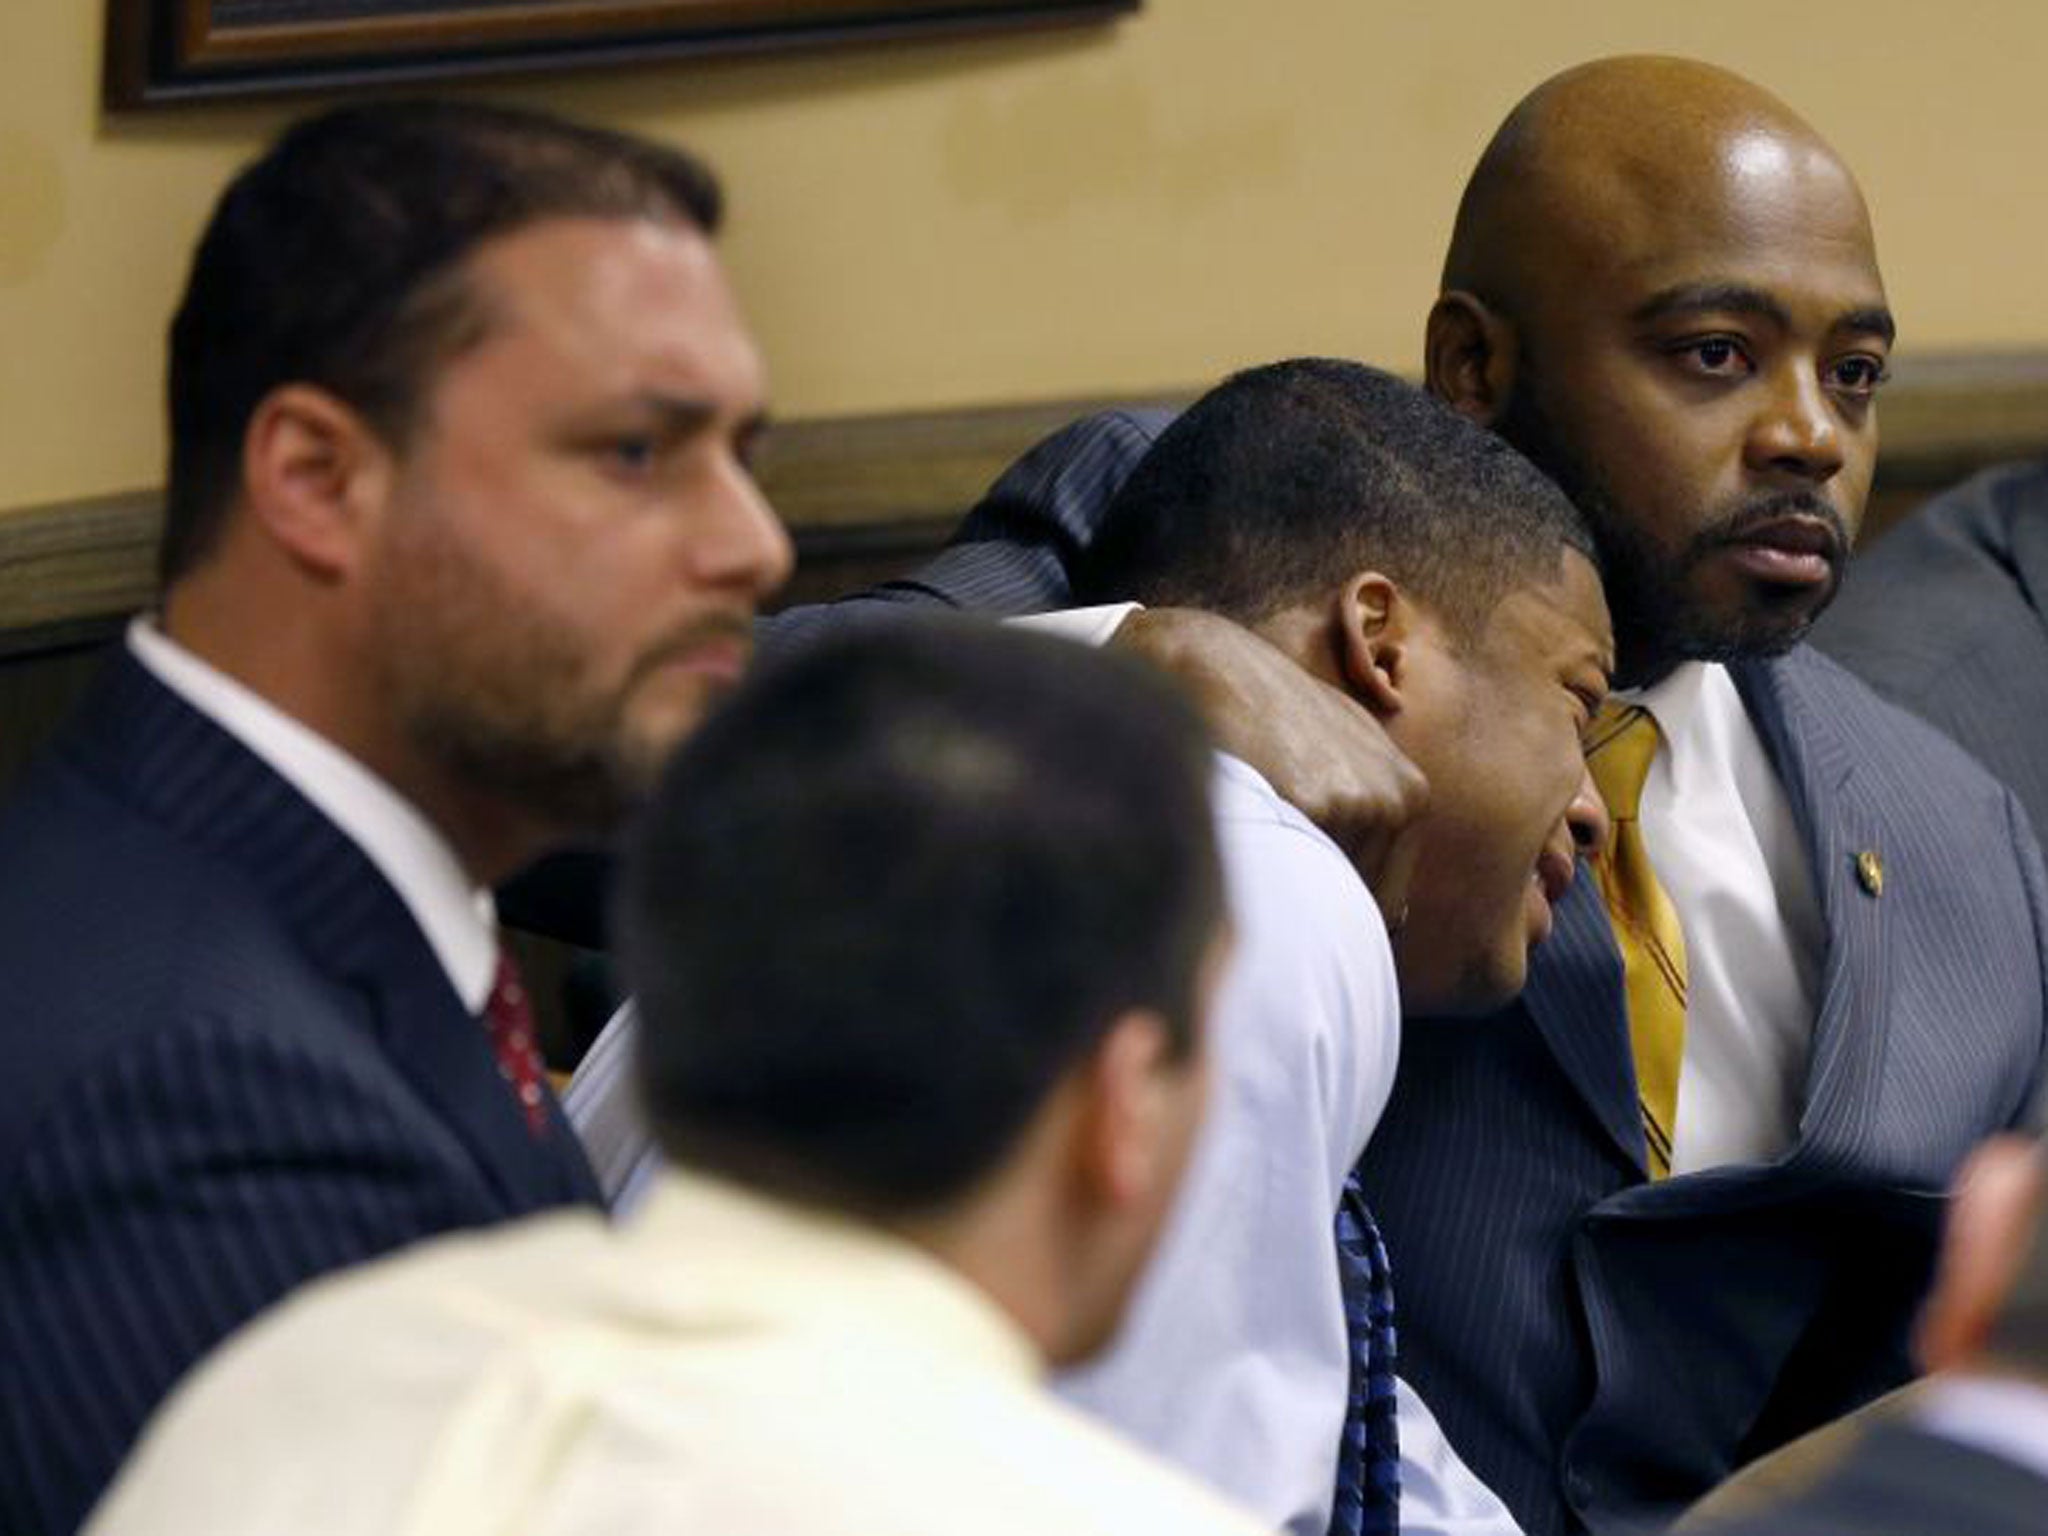 Defense attorney Walter Madison, right, holds his client, 16-year-old Ma'Lik Richmond, second from right, while defense attorney Adam Nemann, left, sits with his client Trent Mays, foreground, 17, as Judge Thomas Lipps pronounces them both delinquent on rape and other charges after their trial in juvenile court in Steubenville, Ohio, Sunday, March 17, 2013. Mays and Richmond were accused of raping a 16-year-old West Virginia girl in August 2012.